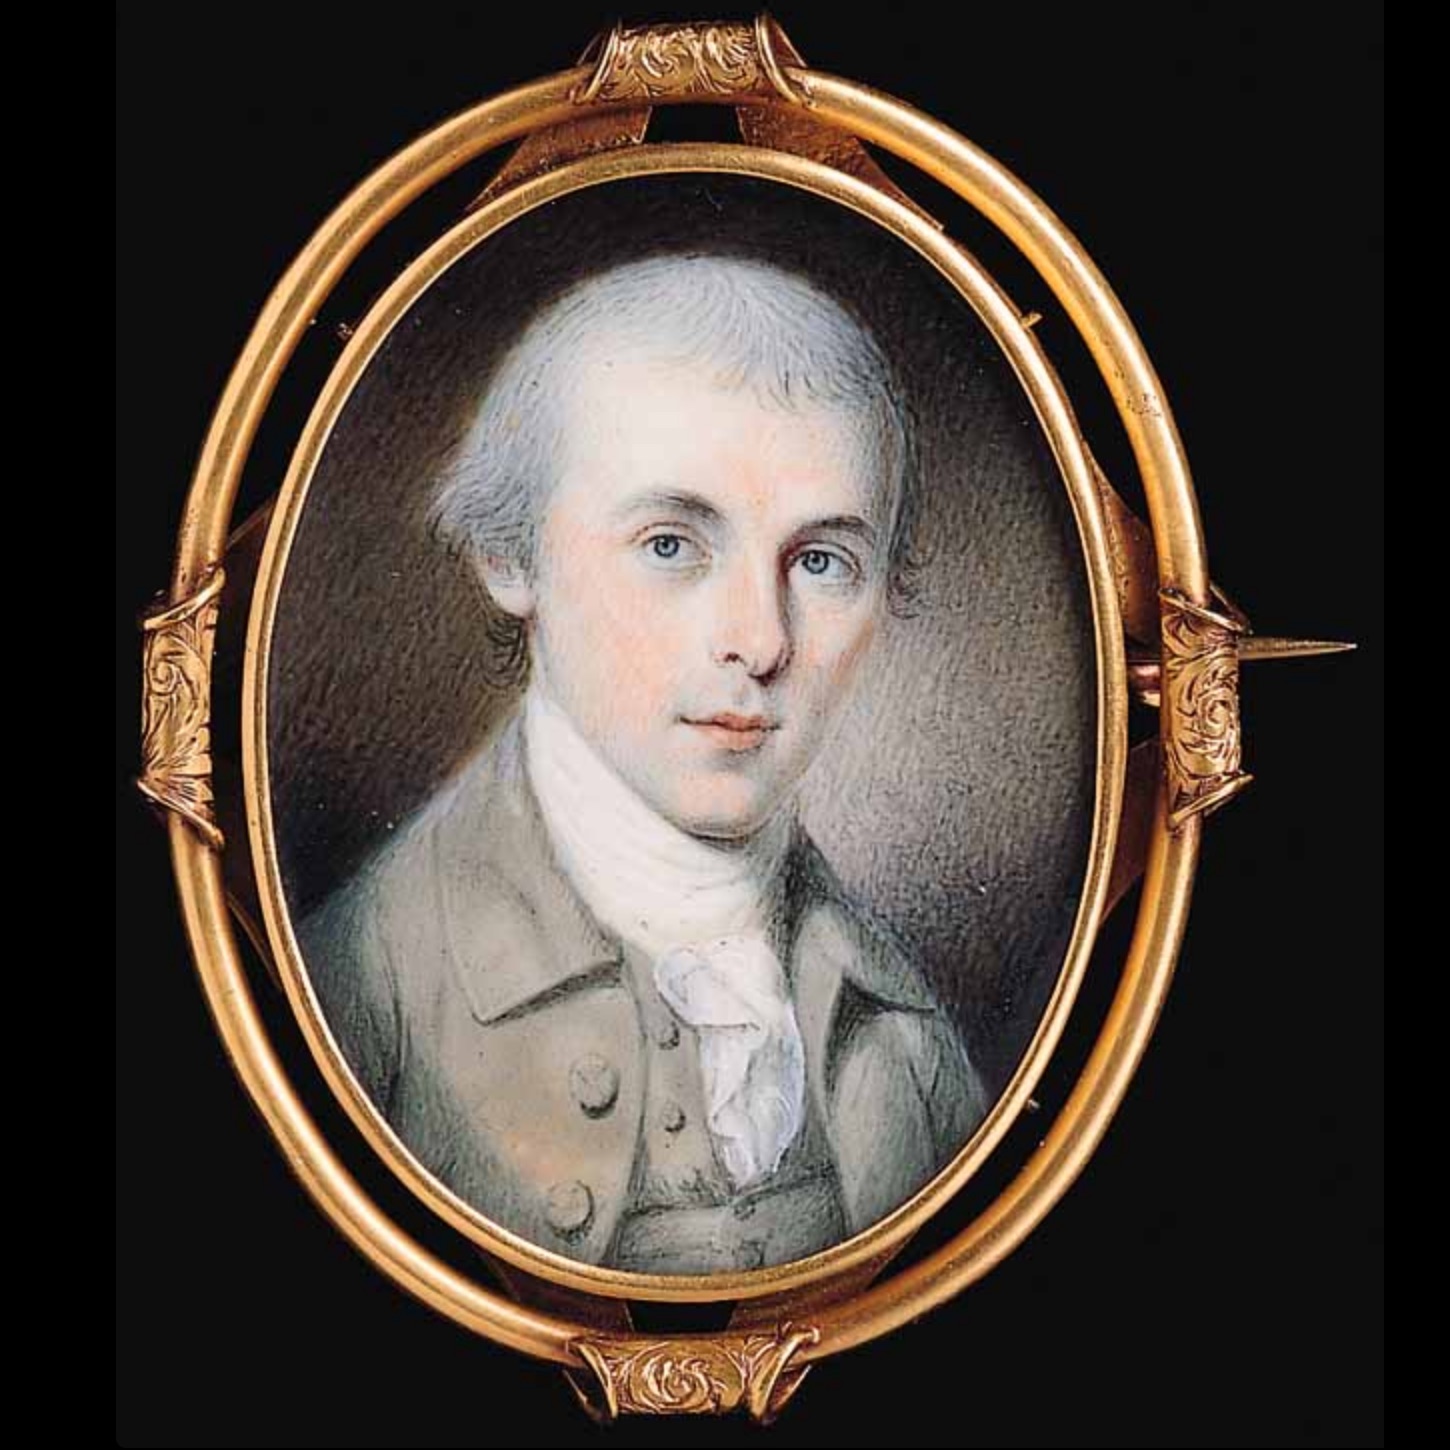 This portrait of James Madison was painted in 1783, shortly before he took the lead in securing passage of the Virginia Statute of Religious Freedom.